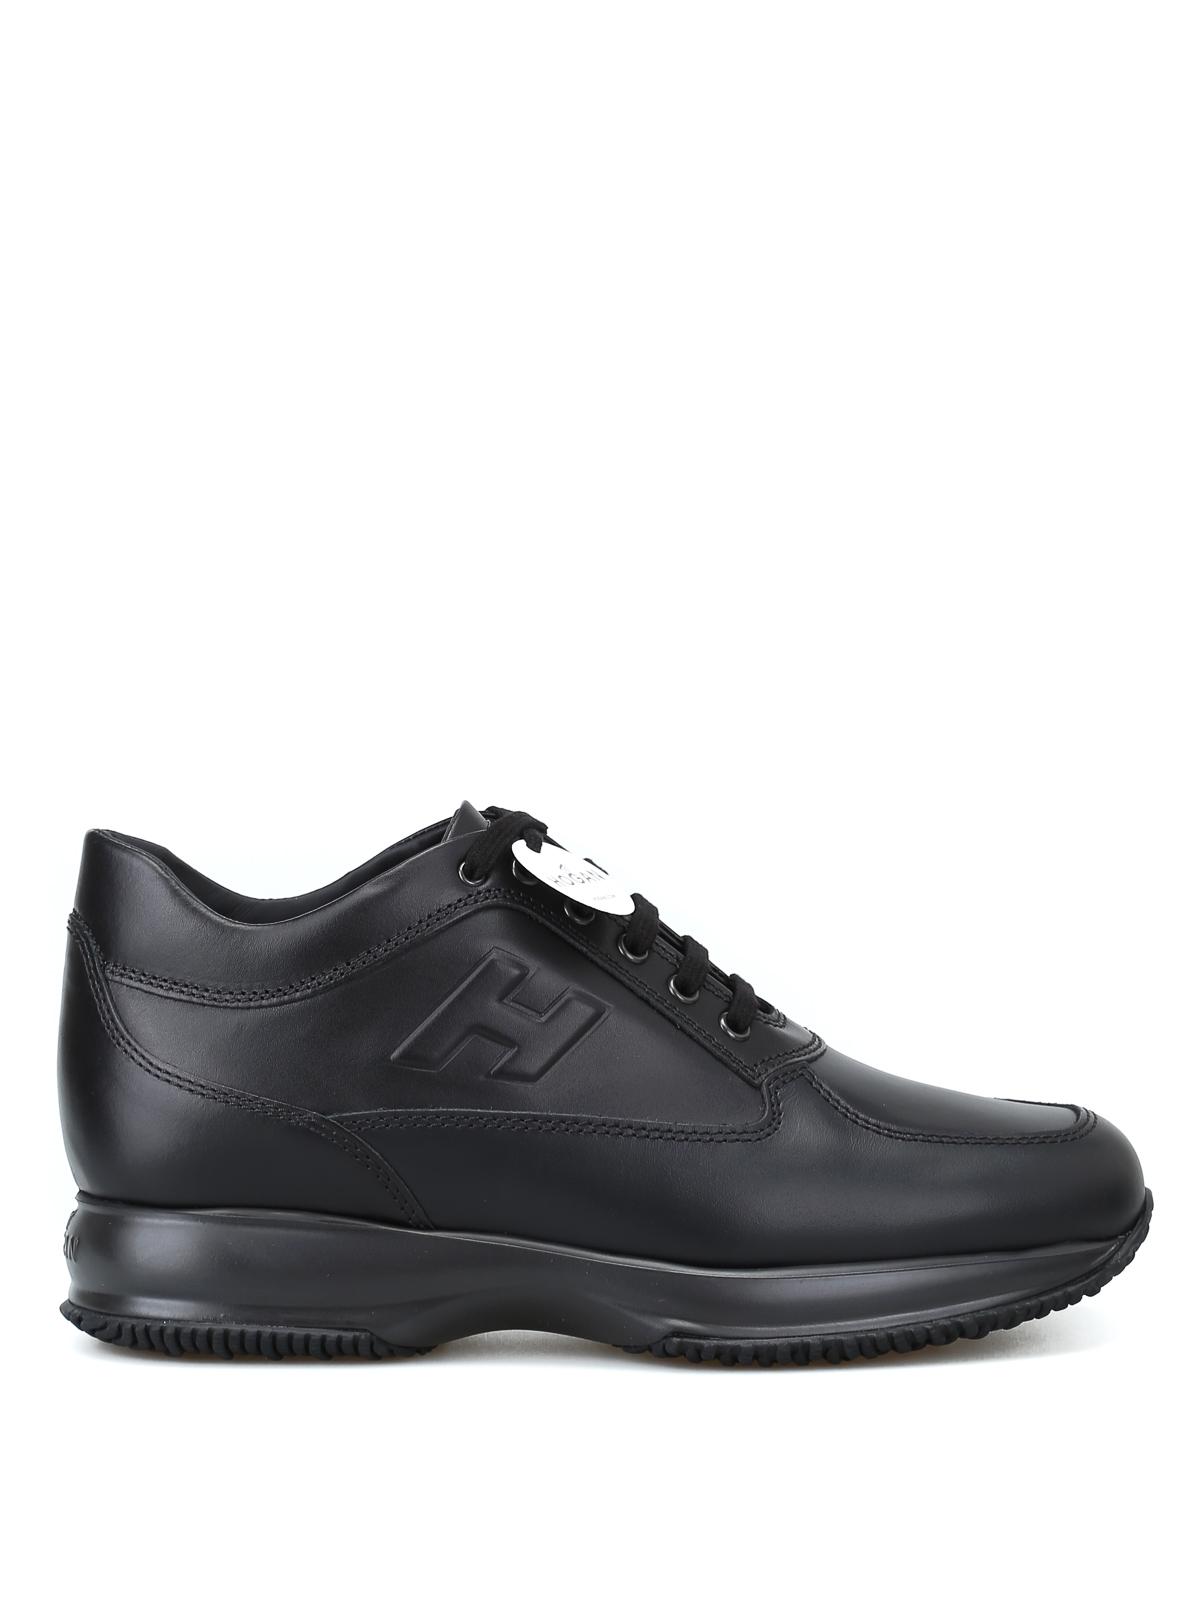 Hogan Interactive Black Leather Mid-top Sneakers for Men - Lyst